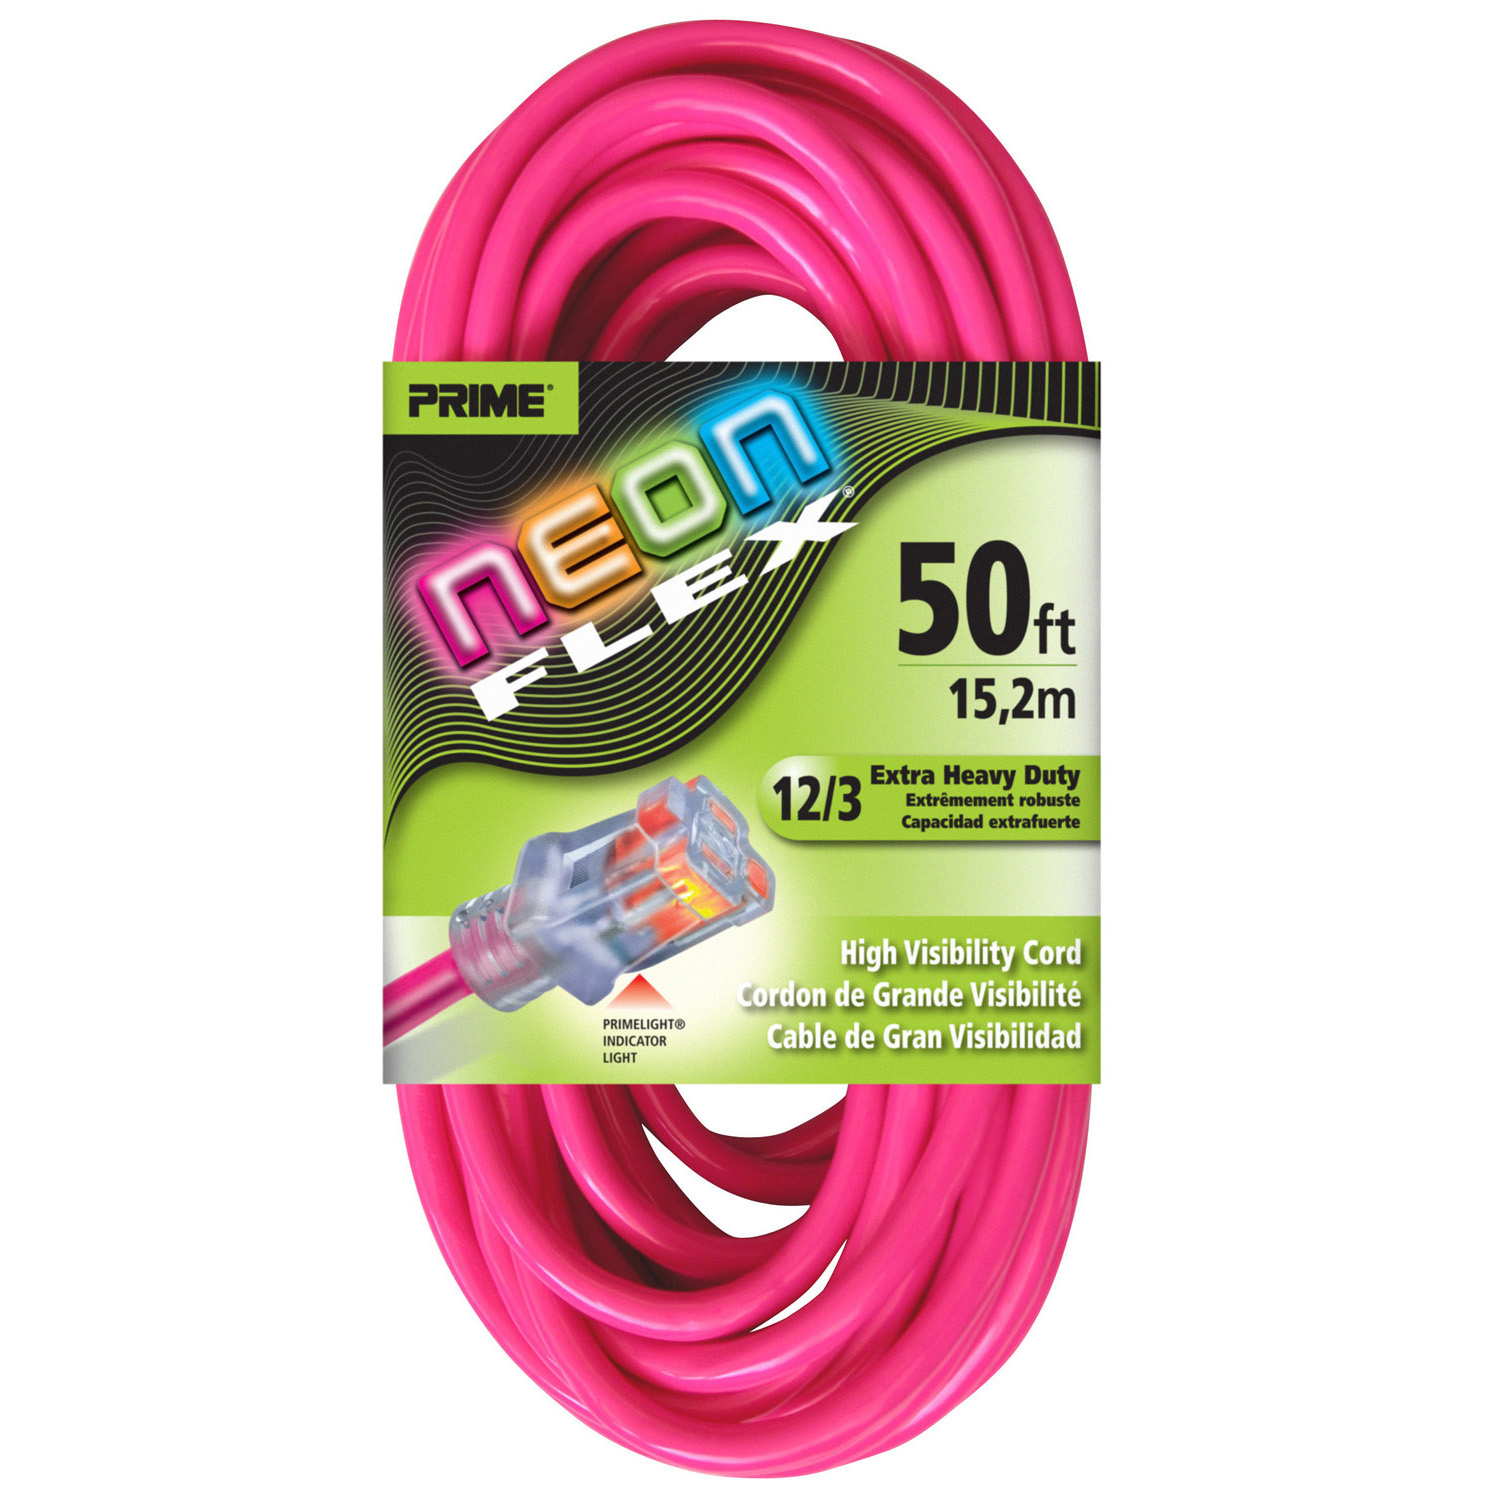 NS513830 50-Foot Neon Flex High Visibility Extension Cord With Indicator Light